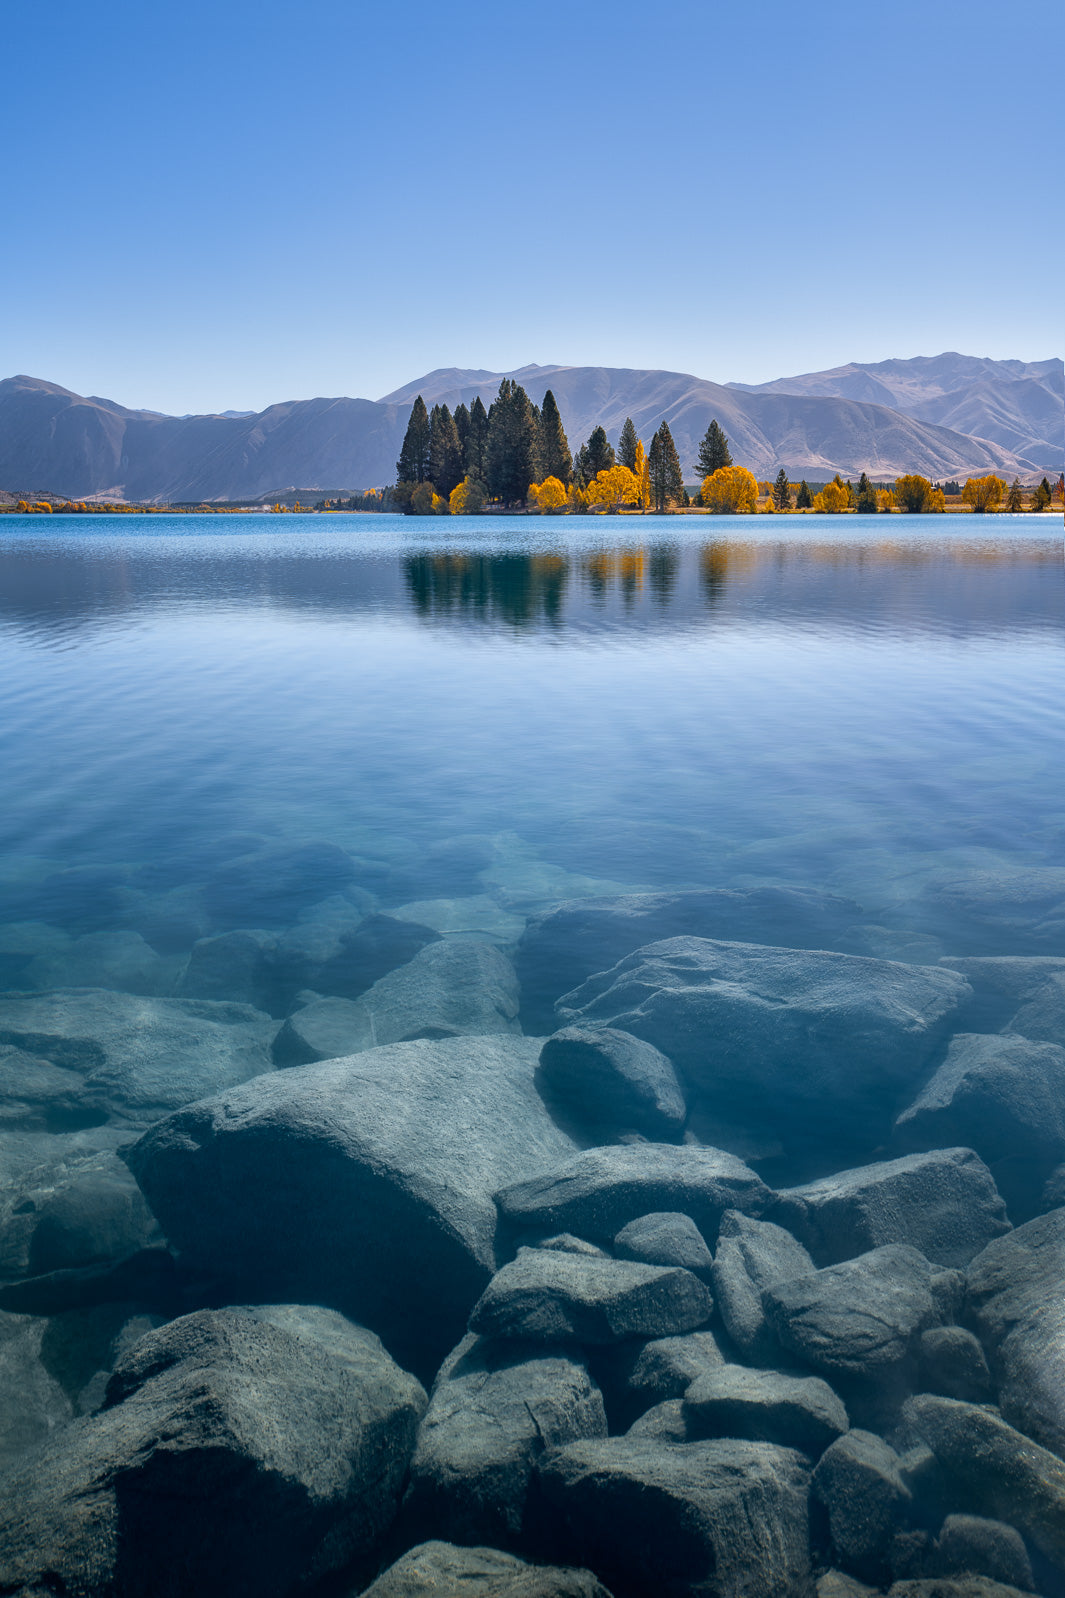 Photo of a New Zealand lake with rocks visible through the clear water in the foreground and trees and mountains in the background of a clear Canterbury blue sky.